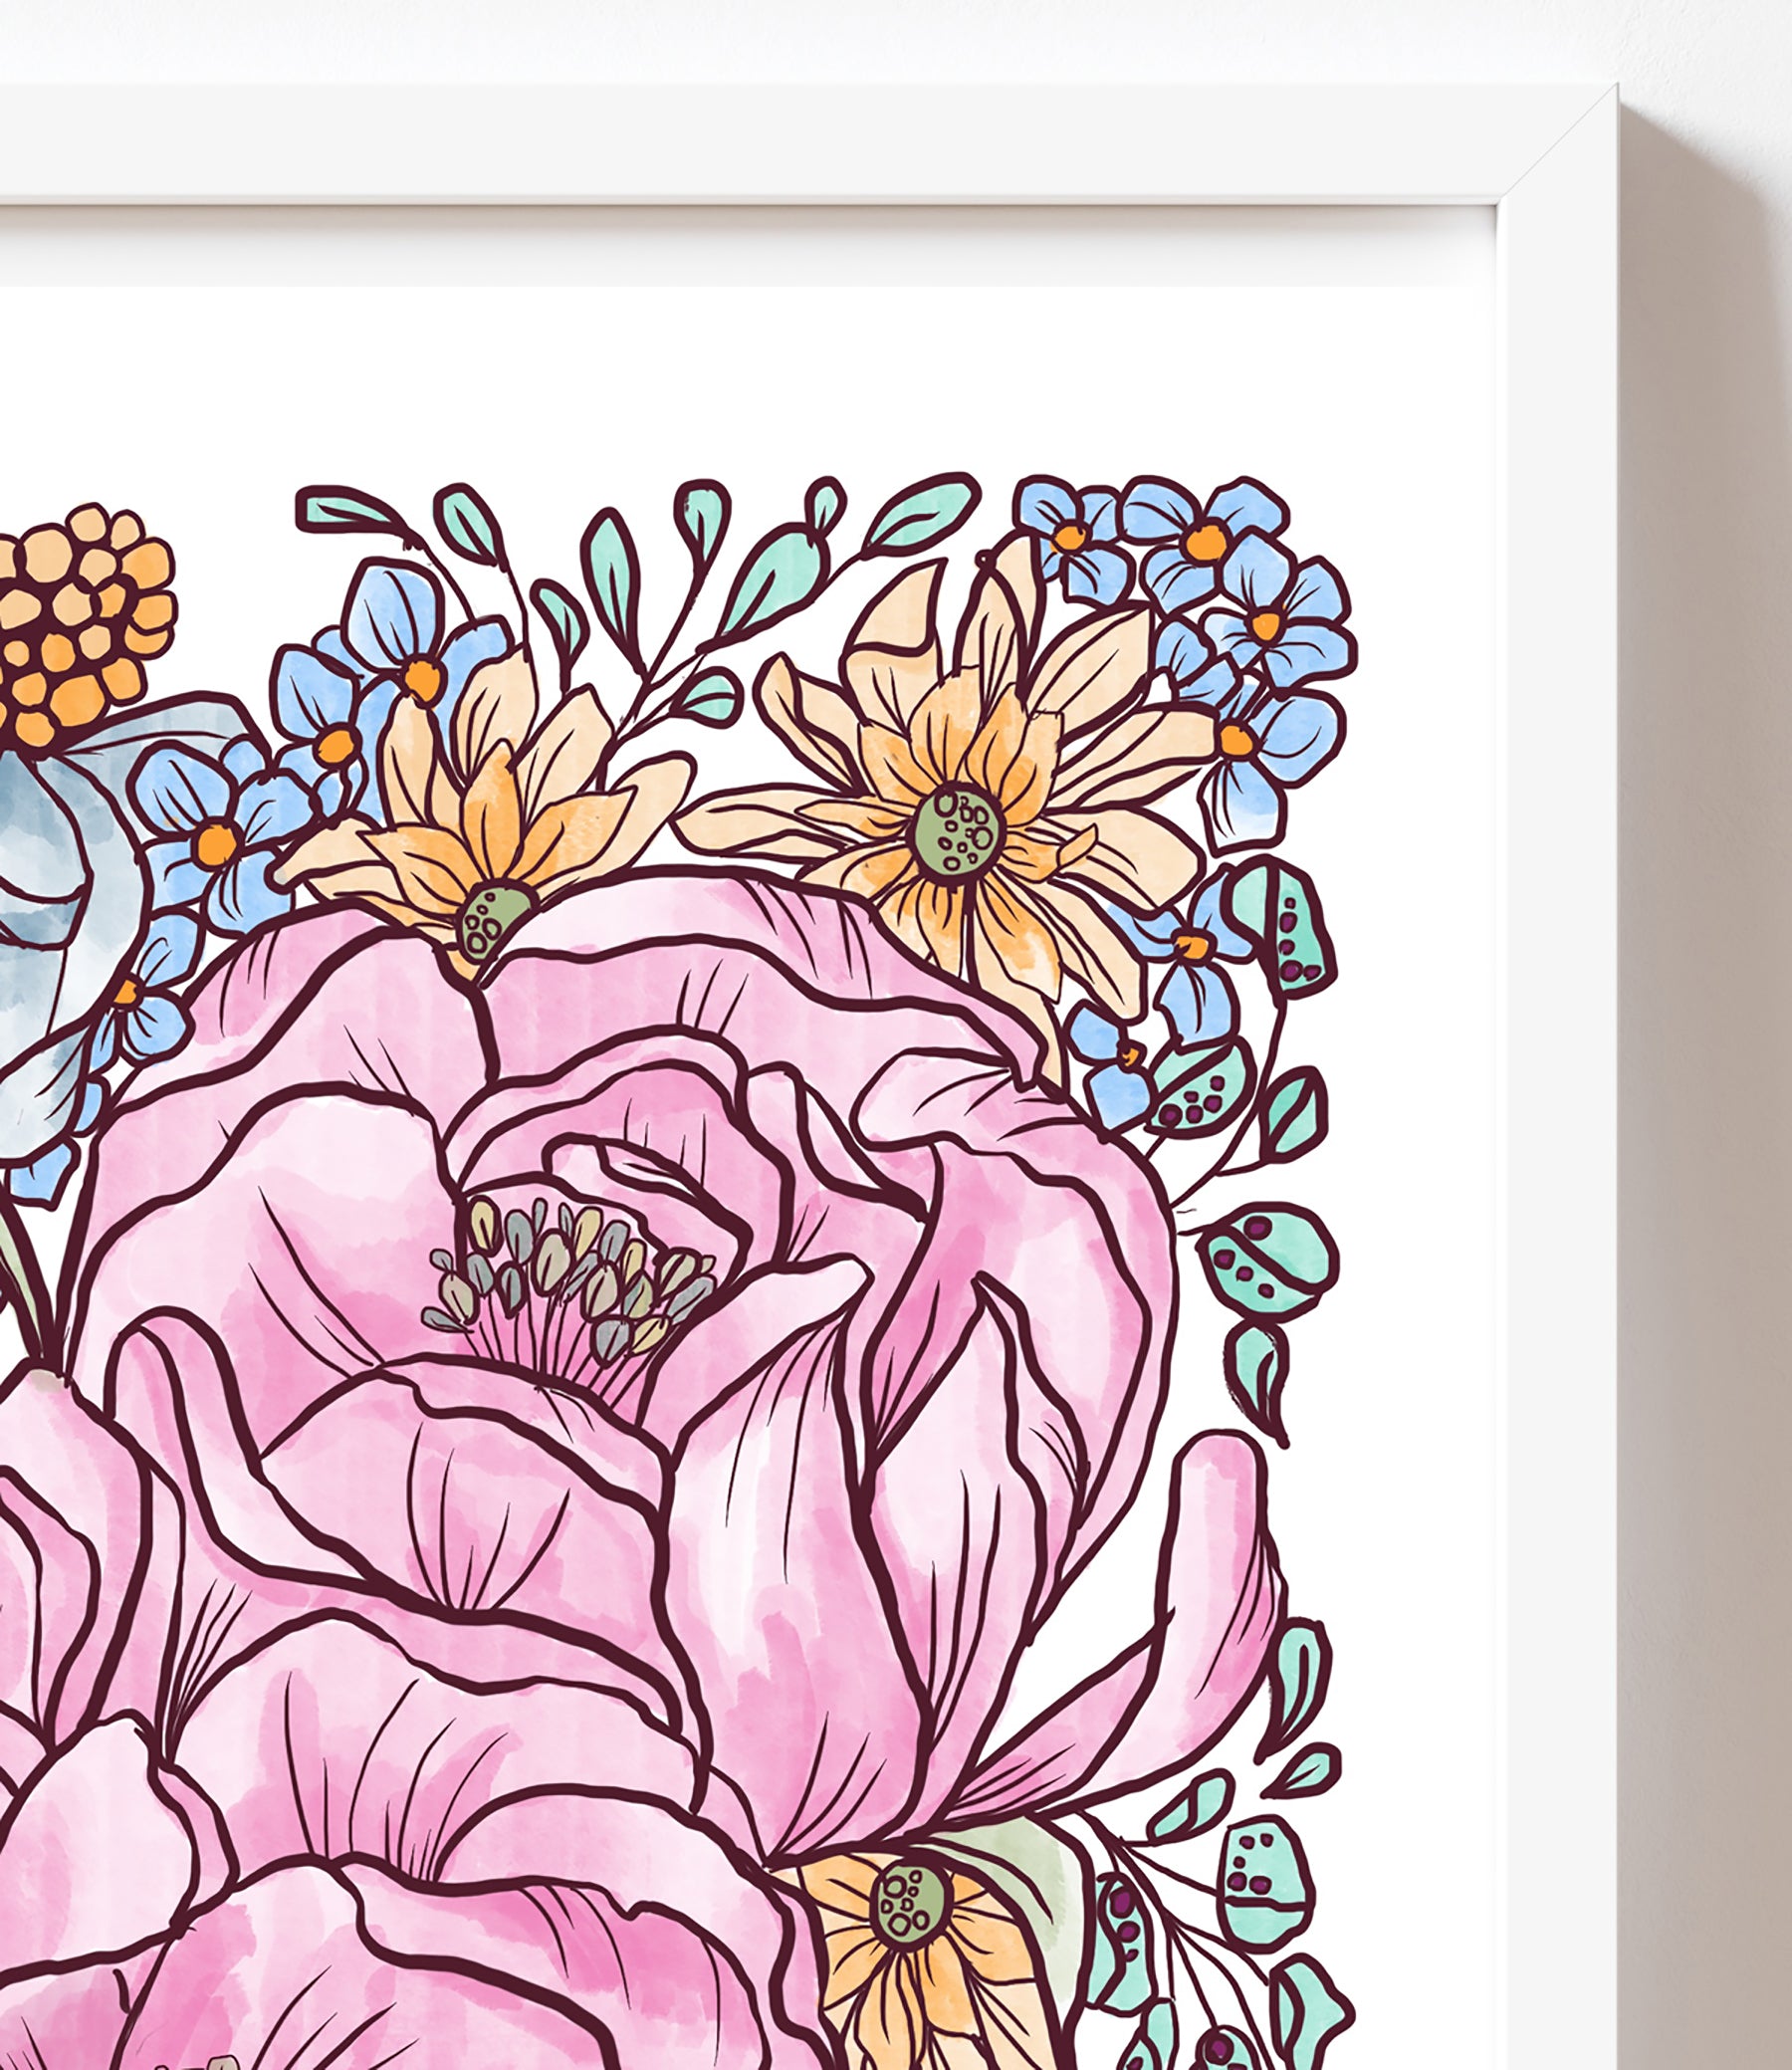 Full Bloom -  illustrated by hand flowers print